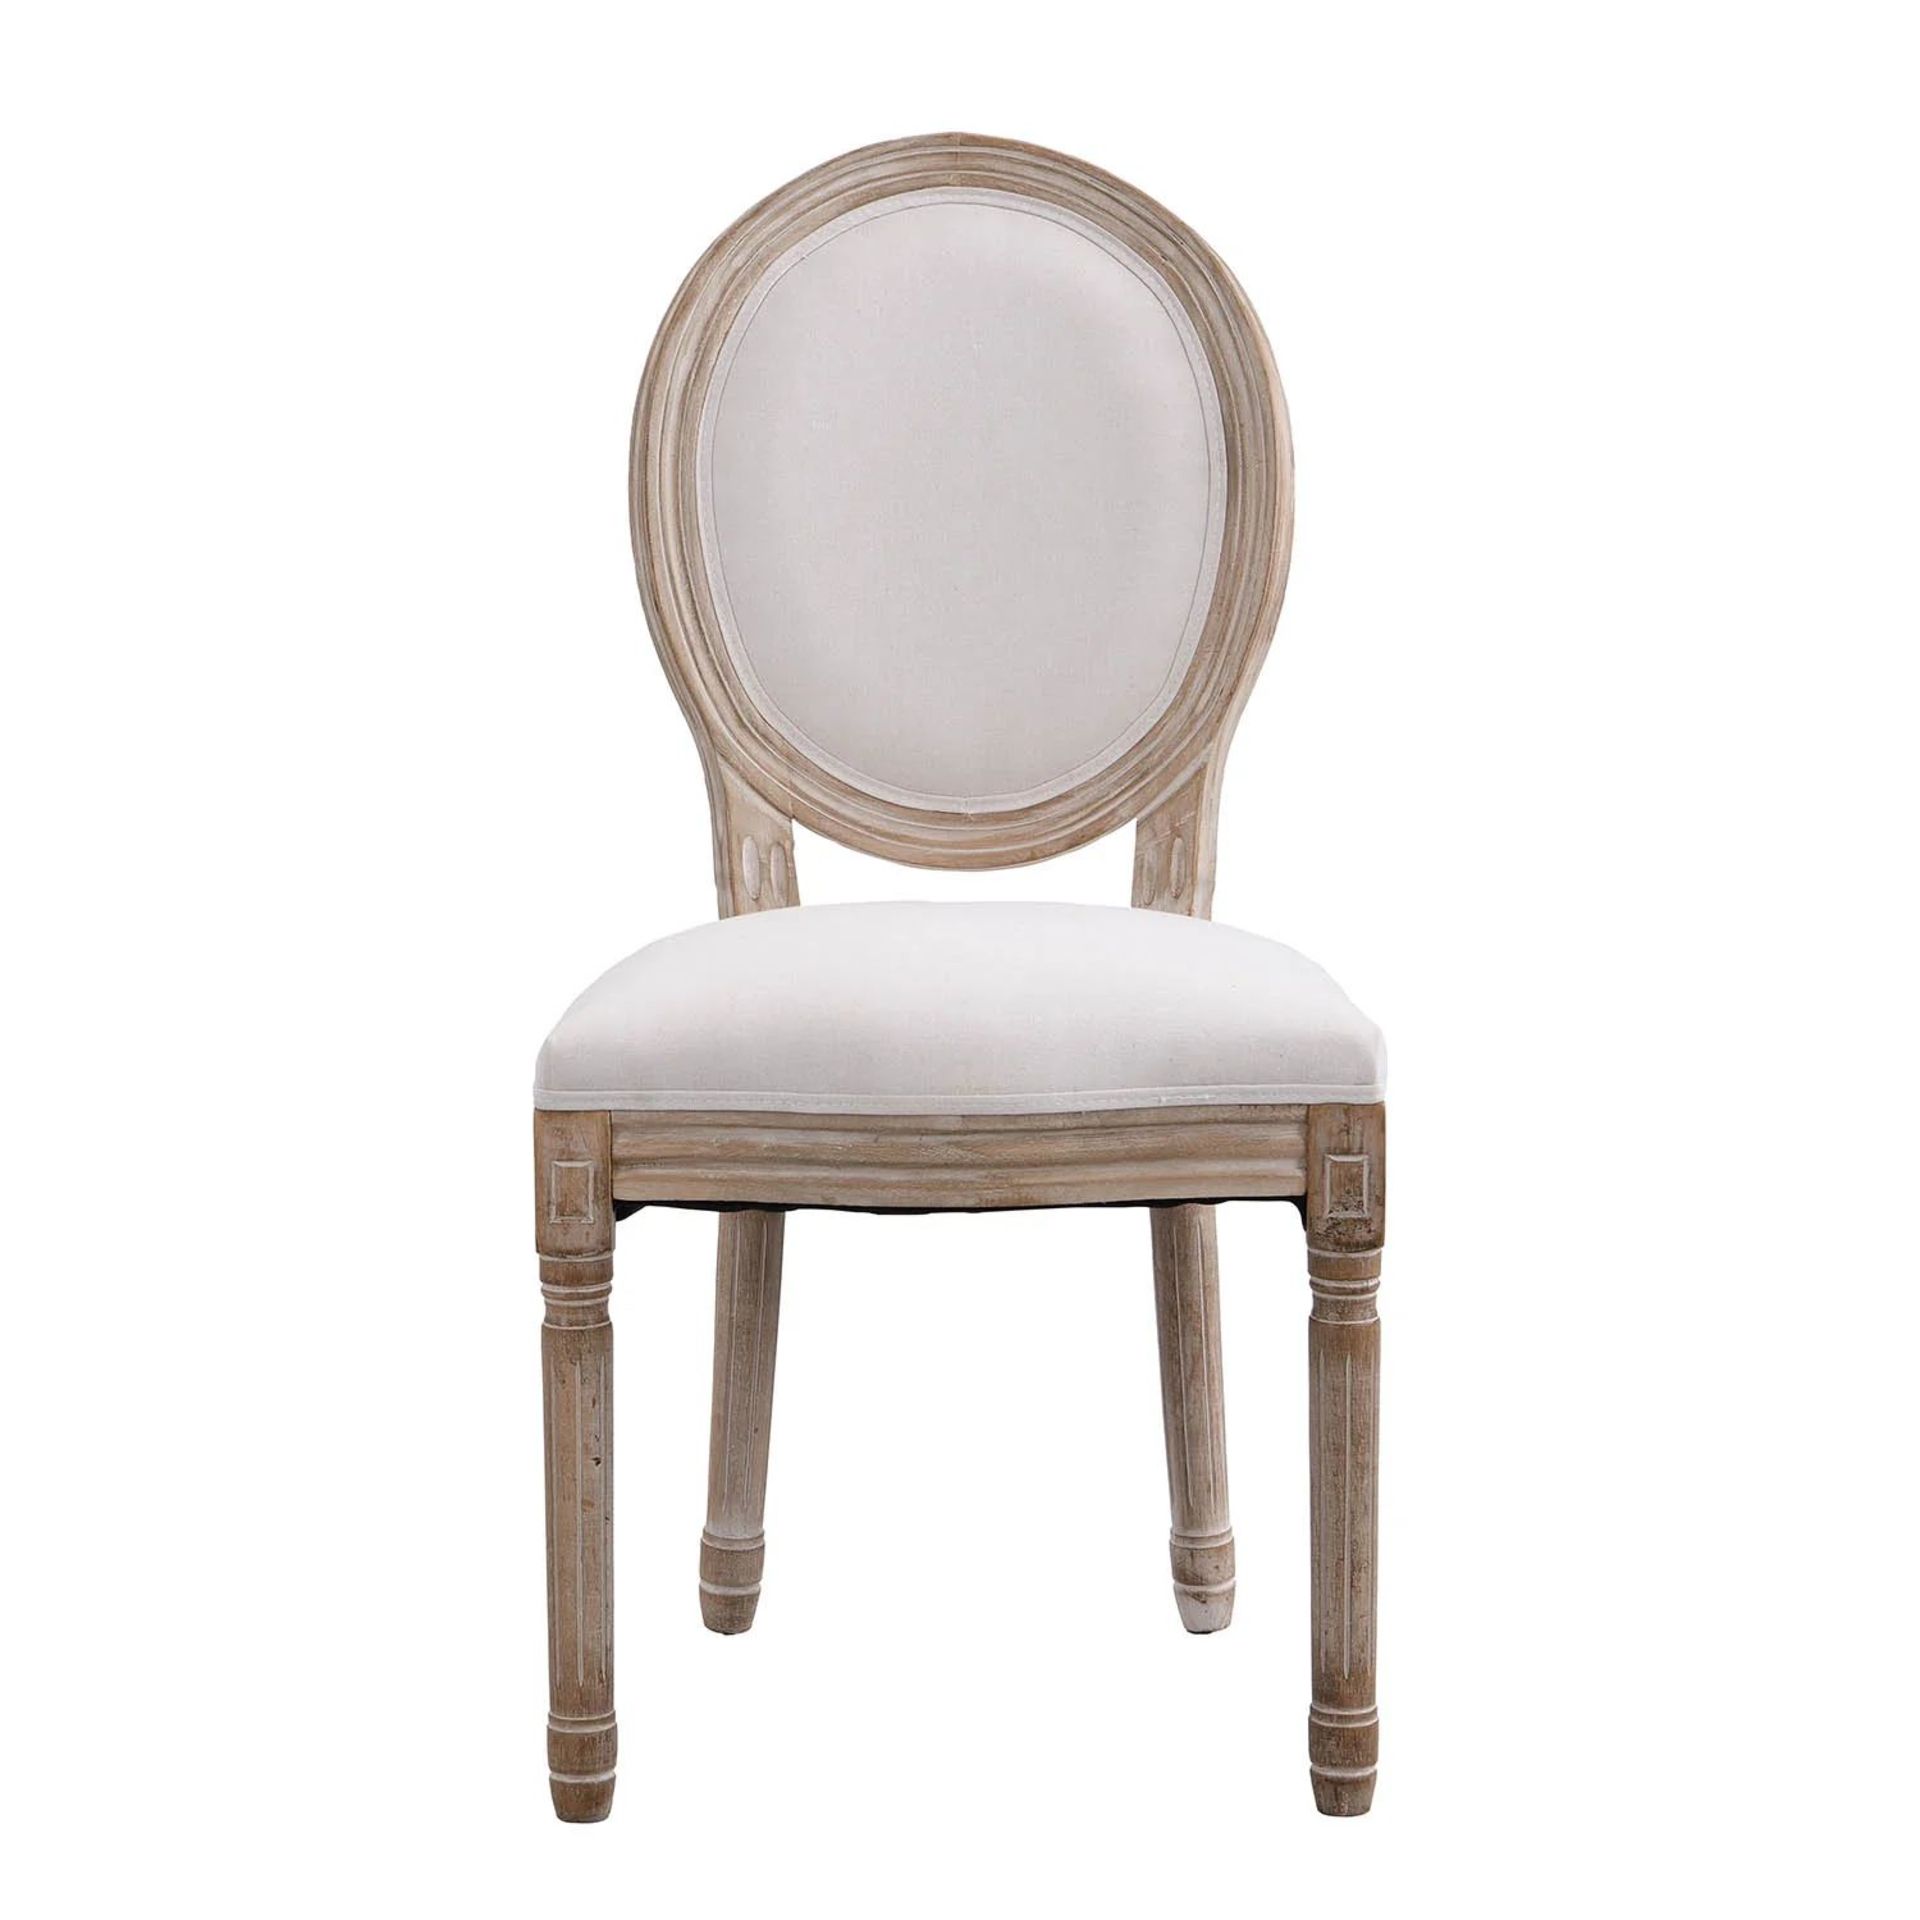 Lainston Set of 2 Classic Limewashed Wooden Dining Chairs, Beige. - R14. RRP £329.99. Inspired by - Image 2 of 2